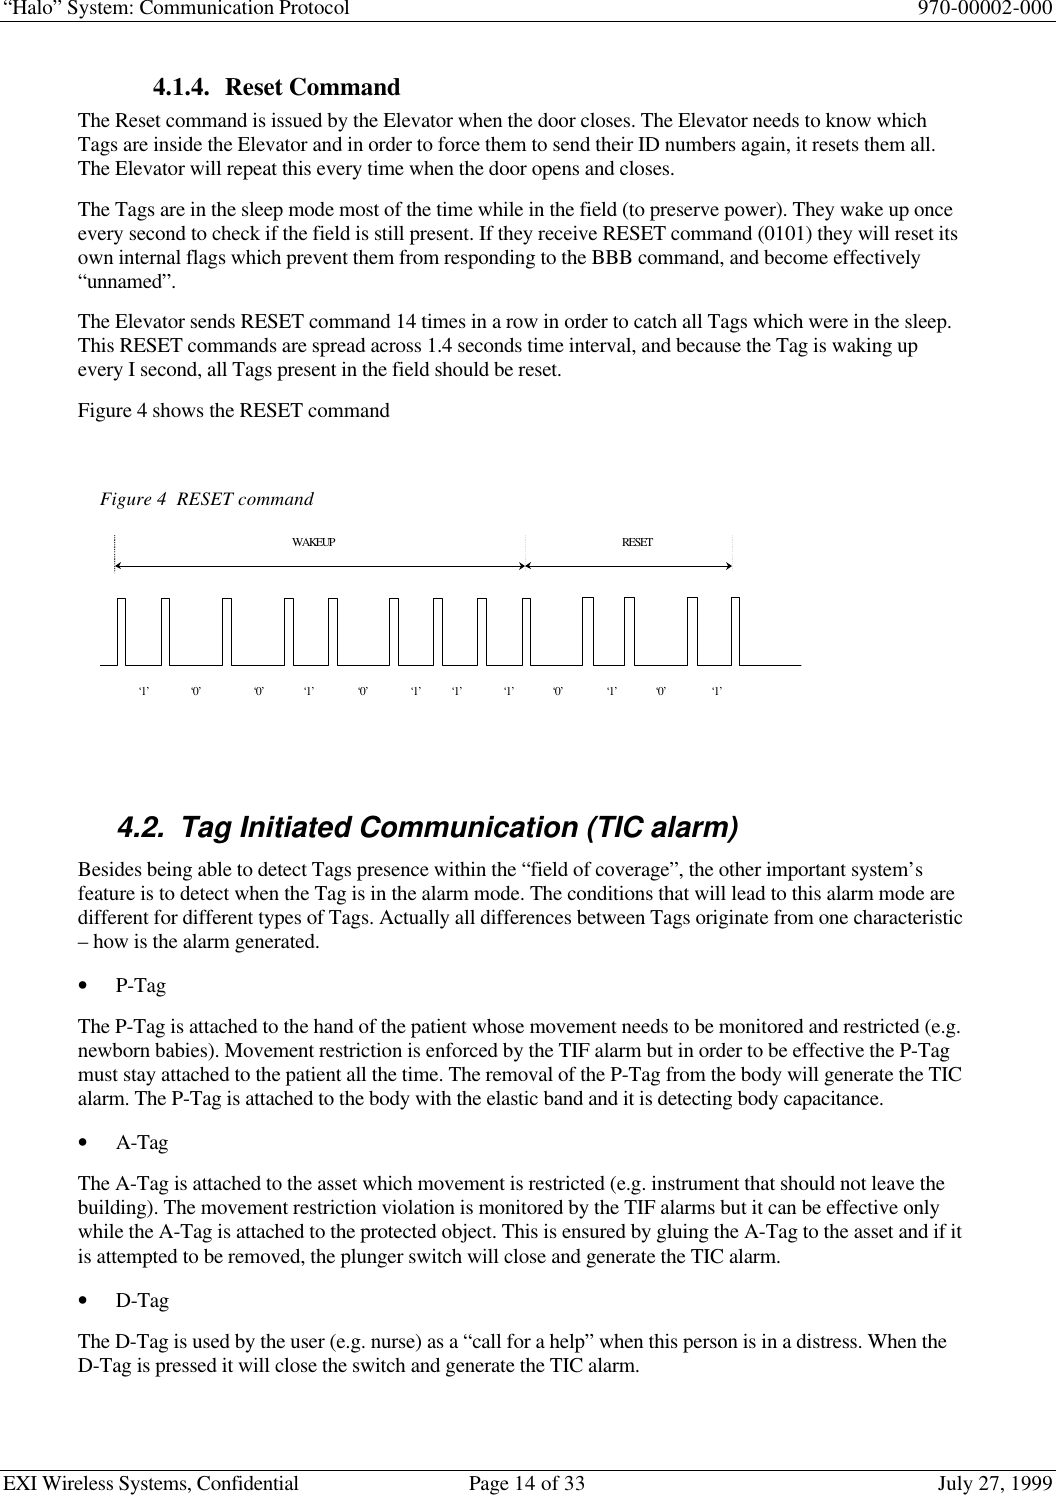 “Halo” System: Communication Protocol 970-00002-000EXI Wireless Systems, Confidential Page 14 of 33 July 27, 19994.1.4. Reset CommandThe Reset command is issued by the Elevator when the door closes. The Elevator needs to know whichTags are inside the Elevator and in order to force them to send their ID numbers again, it resets them all.The Elevator will repeat this every time when the door opens and closes.The Tags are in the sleep mode most of the time while in the field (to preserve power). They wake up onceevery second to check if the field is still present. If they receive RESET command (0101) they will reset itsown internal flags which prevent them from responding to the BBB command, and become effectively“unnamed”.The Elevator sends RESET command 14 times in a row in order to catch all Tags which were in the sleep.This RESET commands are spread across 1.4 seconds time interval, and because the Tag is waking upevery I second, all Tags present in the field should be reset.Figure 4 shows the RESET command4.2. Tag Initiated Communication (TIC alarm)Besides being able to detect Tags presence within the “field of coverage”, the other important system’sfeature is to detect when the Tag is in the alarm mode. The conditions that will lead to this alarm mode aredifferent for different types of Tags. Actually all differences between Tags originate from one characteristic– how is the alarm generated.• P-TagThe P-Tag is attached to the hand of the patient whose movement needs to be monitored and restricted (e.g.newborn babies). Movement restriction is enforced by the TIF alarm but in order to be effective the P-Tagmust stay attached to the patient all the time. The removal of the P-Tag from the body will generate the TICalarm. The P-Tag is attached to the body with the elastic band and it is detecting body capacitance.• A-TagThe A-Tag is attached to the asset which movement is restricted (e.g. instrument that should not leave thebuilding). The movement restriction violation is monitored by the TIF alarms but it can be effective onlywhile the A-Tag is attached to the protected object. This is ensured by gluing the A-Tag to the asset and if itis attempted to be removed, the plunger switch will close and generate the TIC alarm.• D-TagThe D-Tag is used by the user (e.g. nurse) as a “call for a help” when this person is in a distress. When theD-Tag is pressed it will close the switch and generate the TIC alarm.Figure 4  RESET command‘1’‘0’WAKEUP‘0’‘0’‘1’‘1’‘1’‘1’‘1’‘0’‘0’‘1’RESET